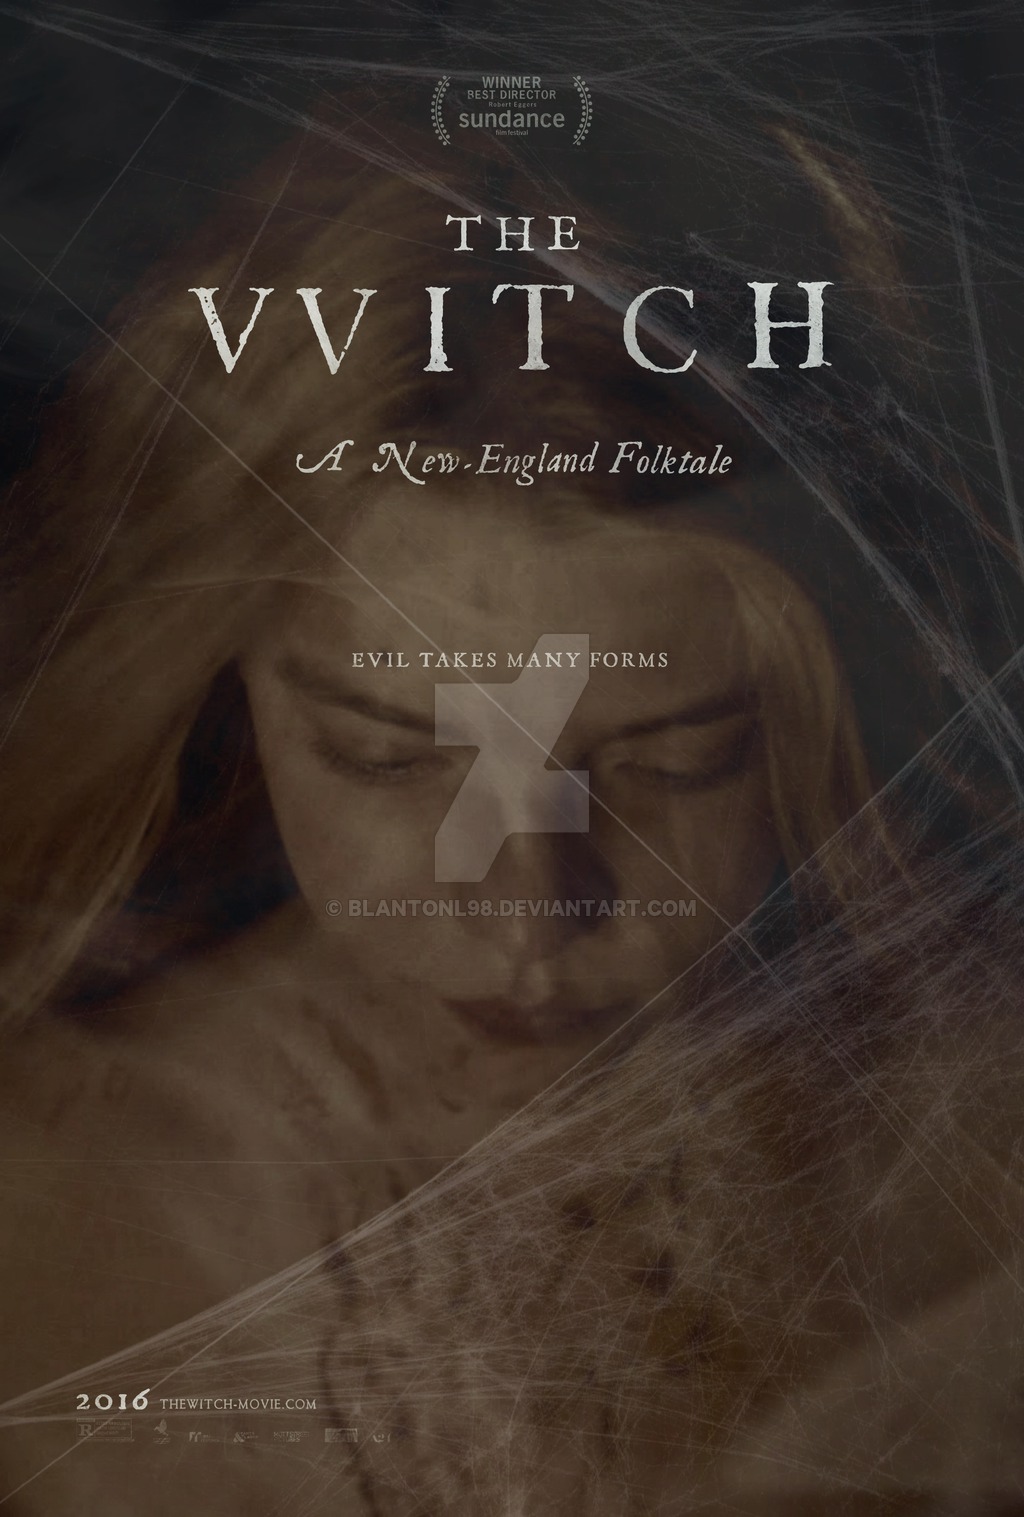 The-Witch-Poster-movie-trailers-40045585-1024-1517.jpg